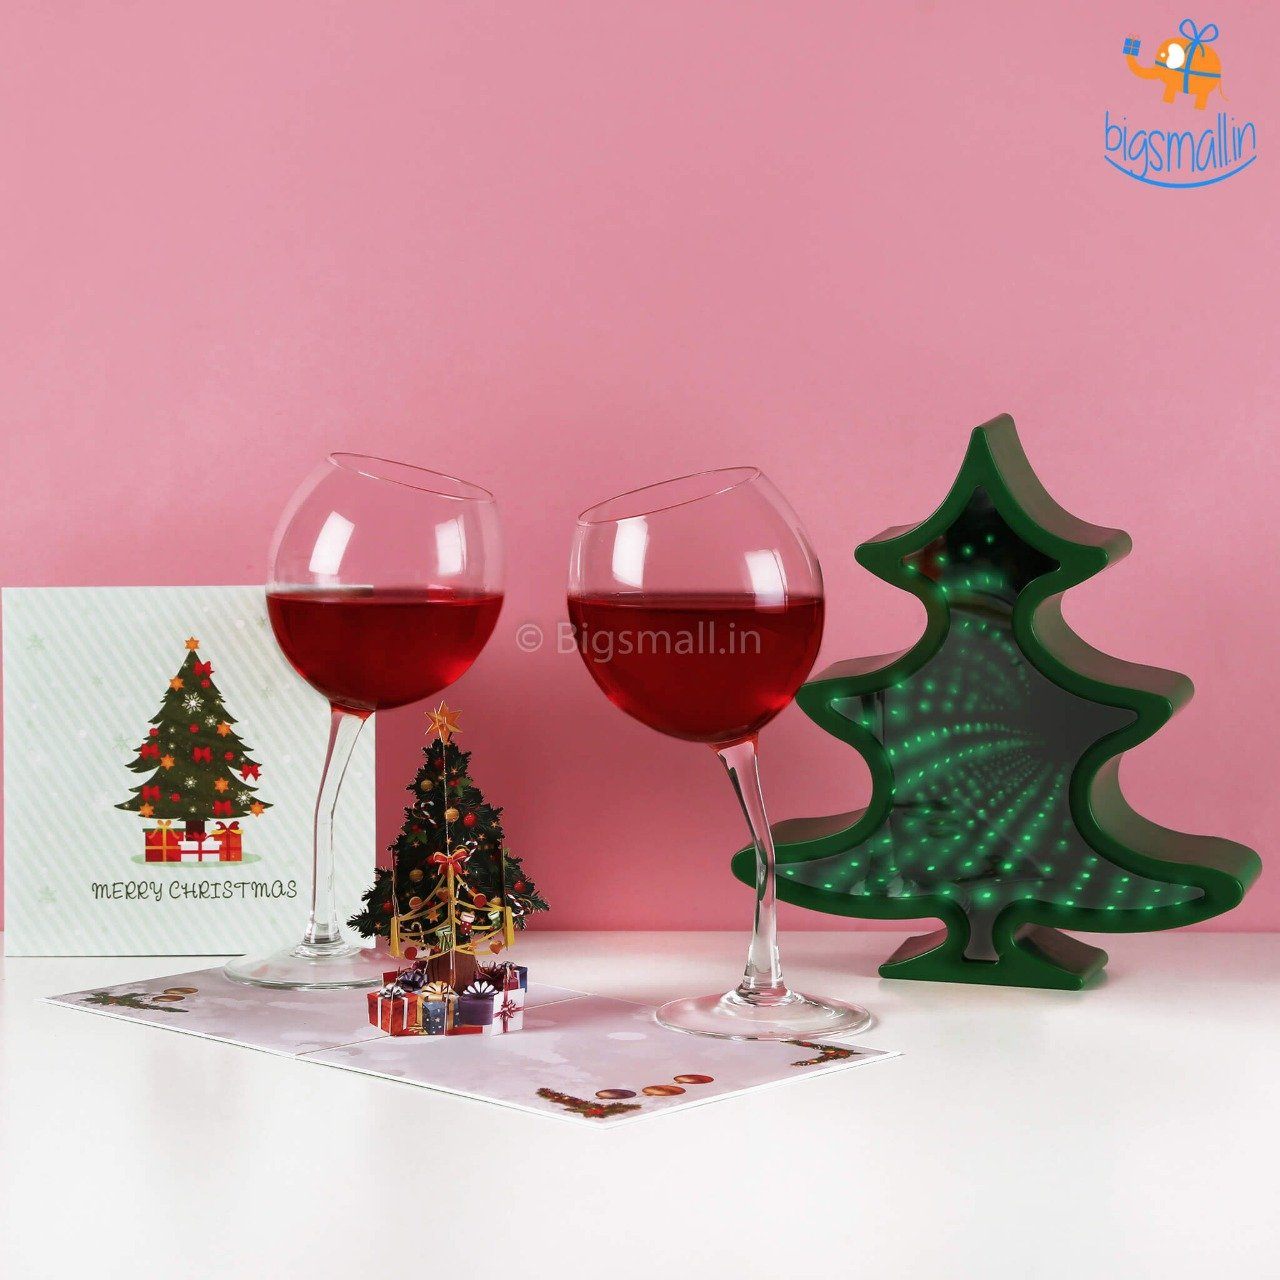 Product Of The Week - Christmas Gift Set - 3 Pcs